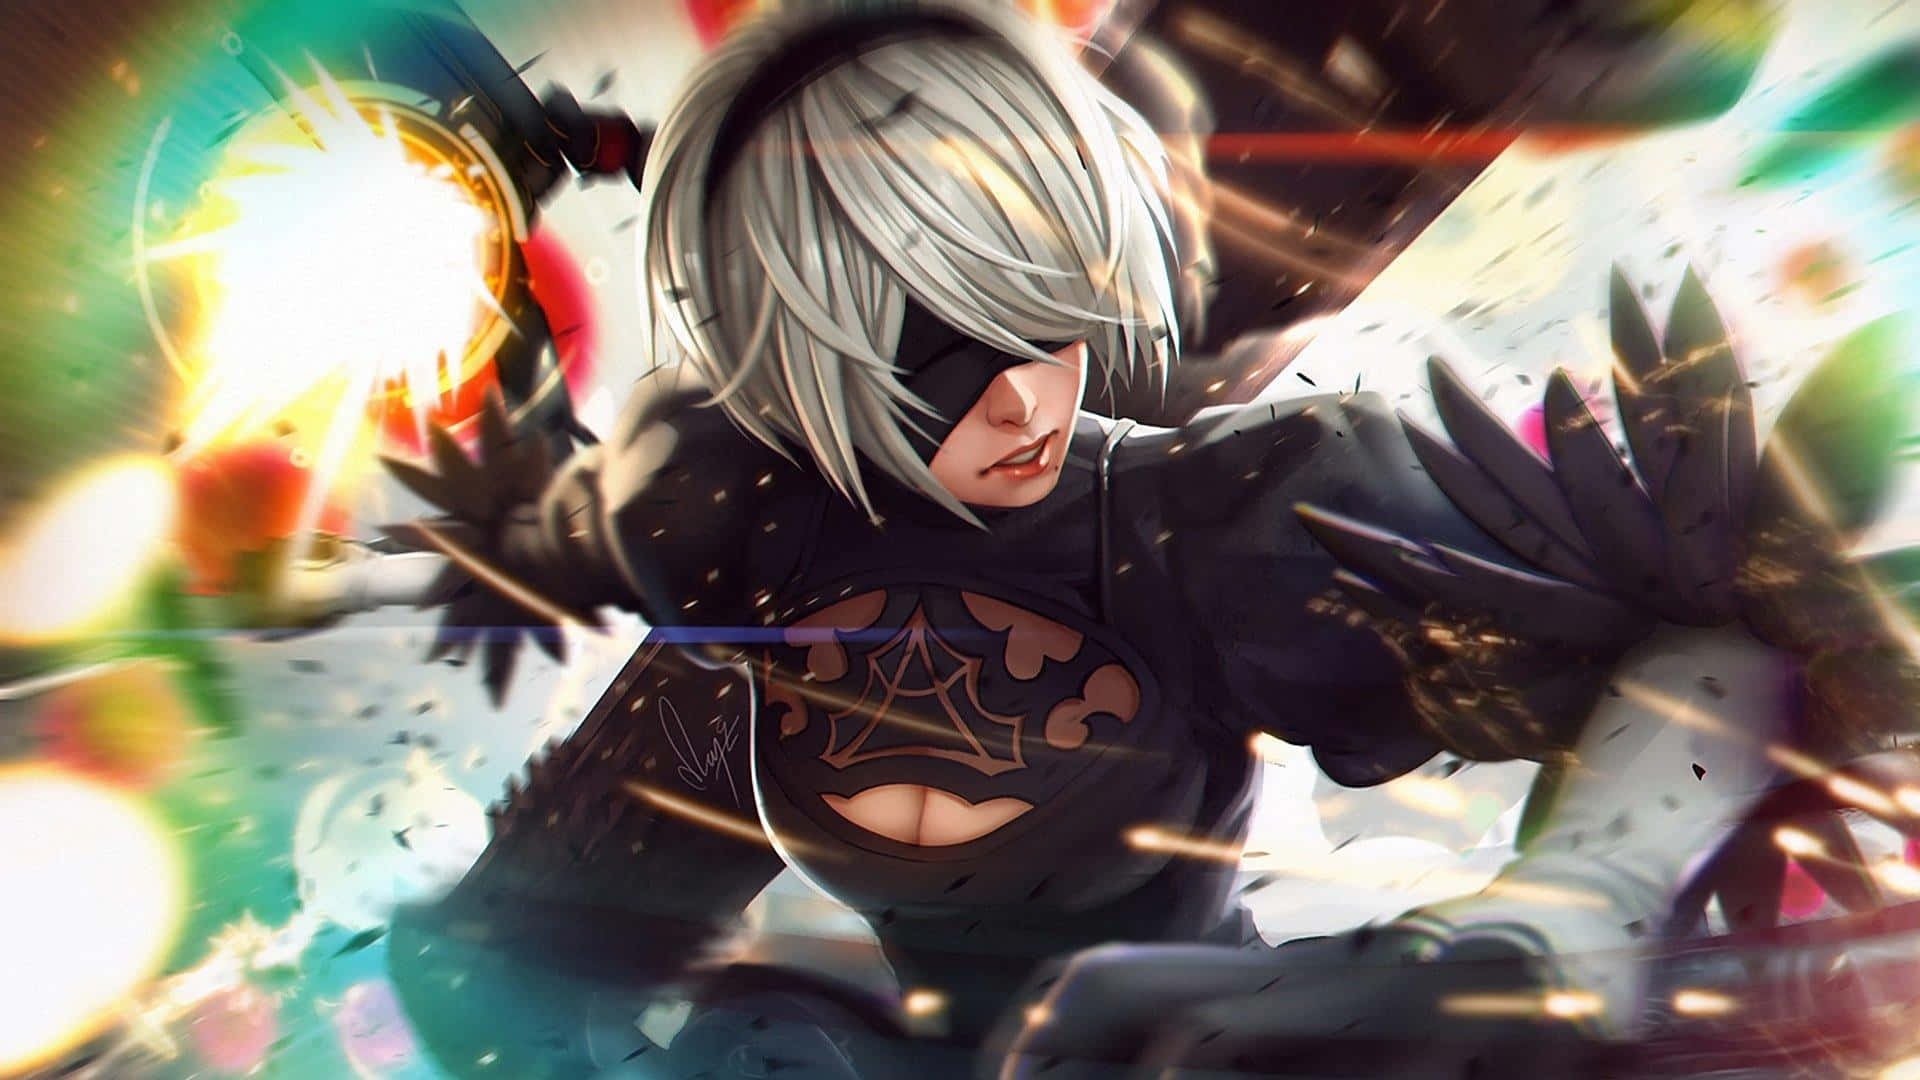 2B from NieR:Automata using her signature weapons to bring justice